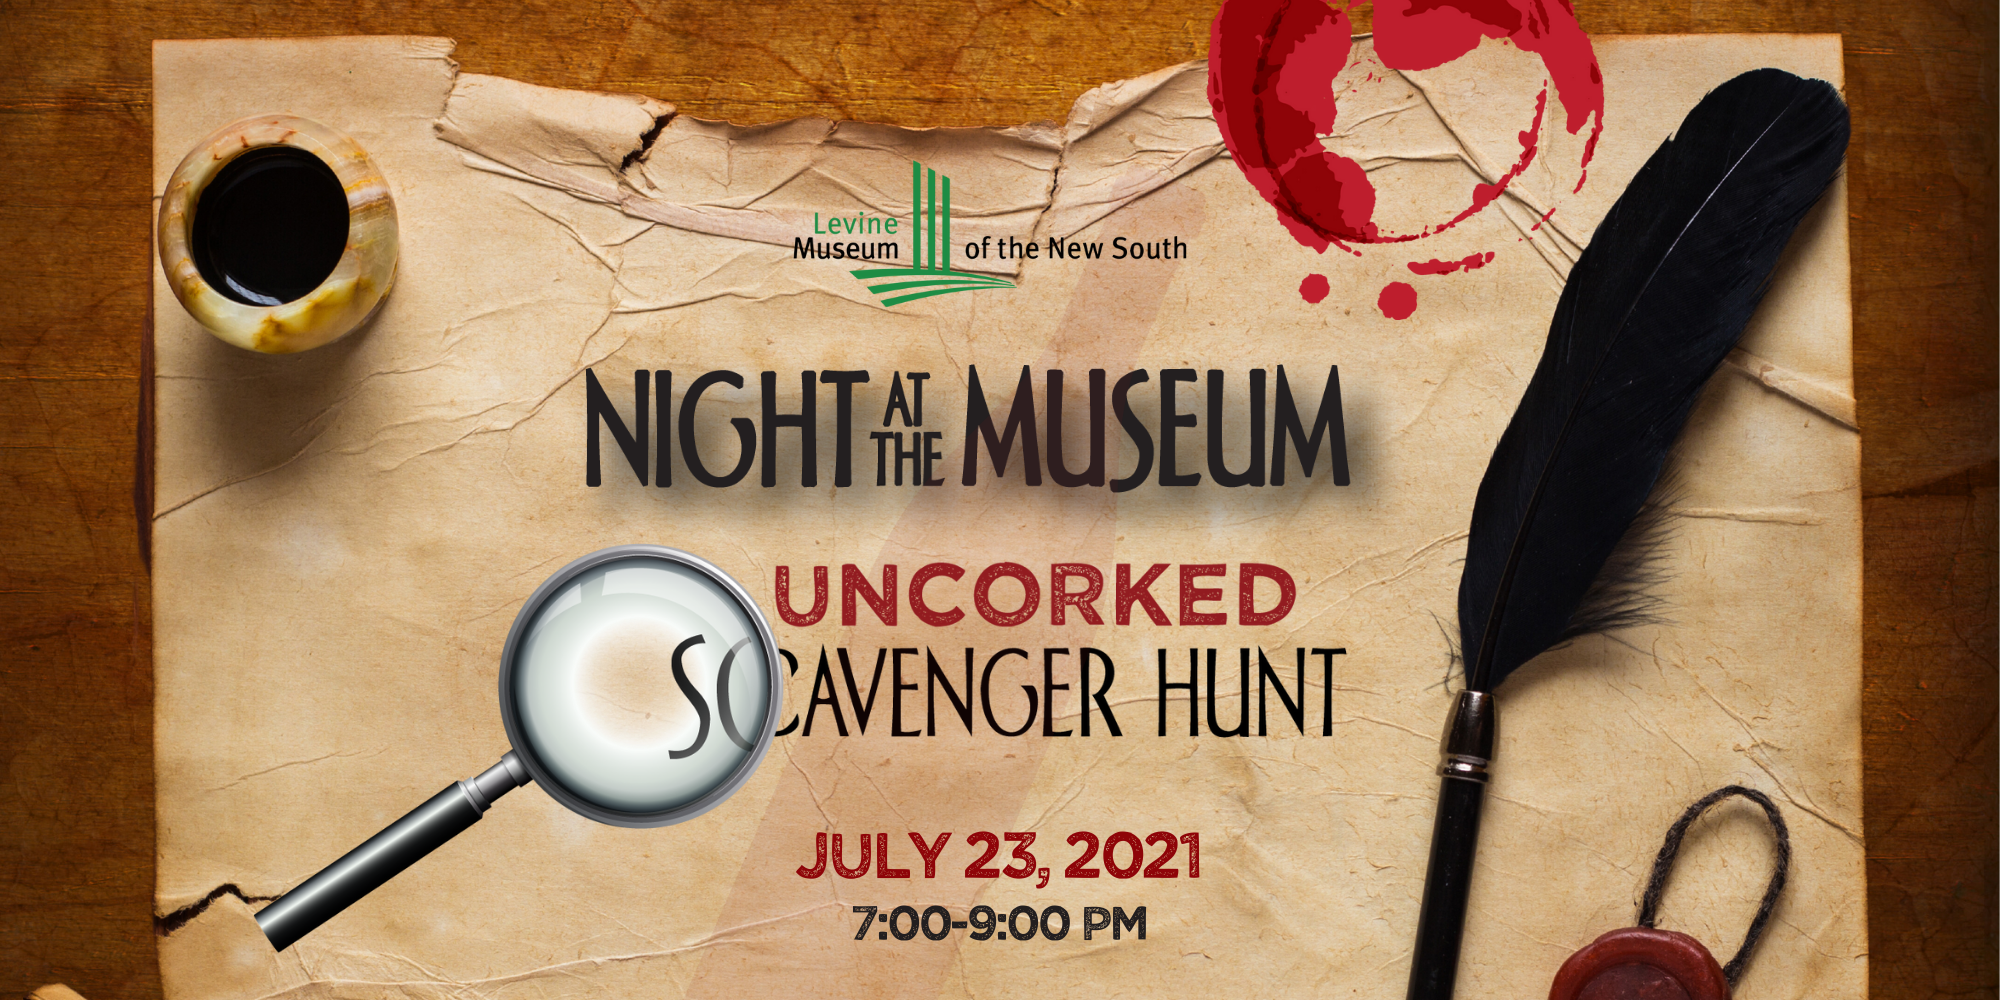 Levine Museum of the New South Uncorked Scavenger Hunt Event Image